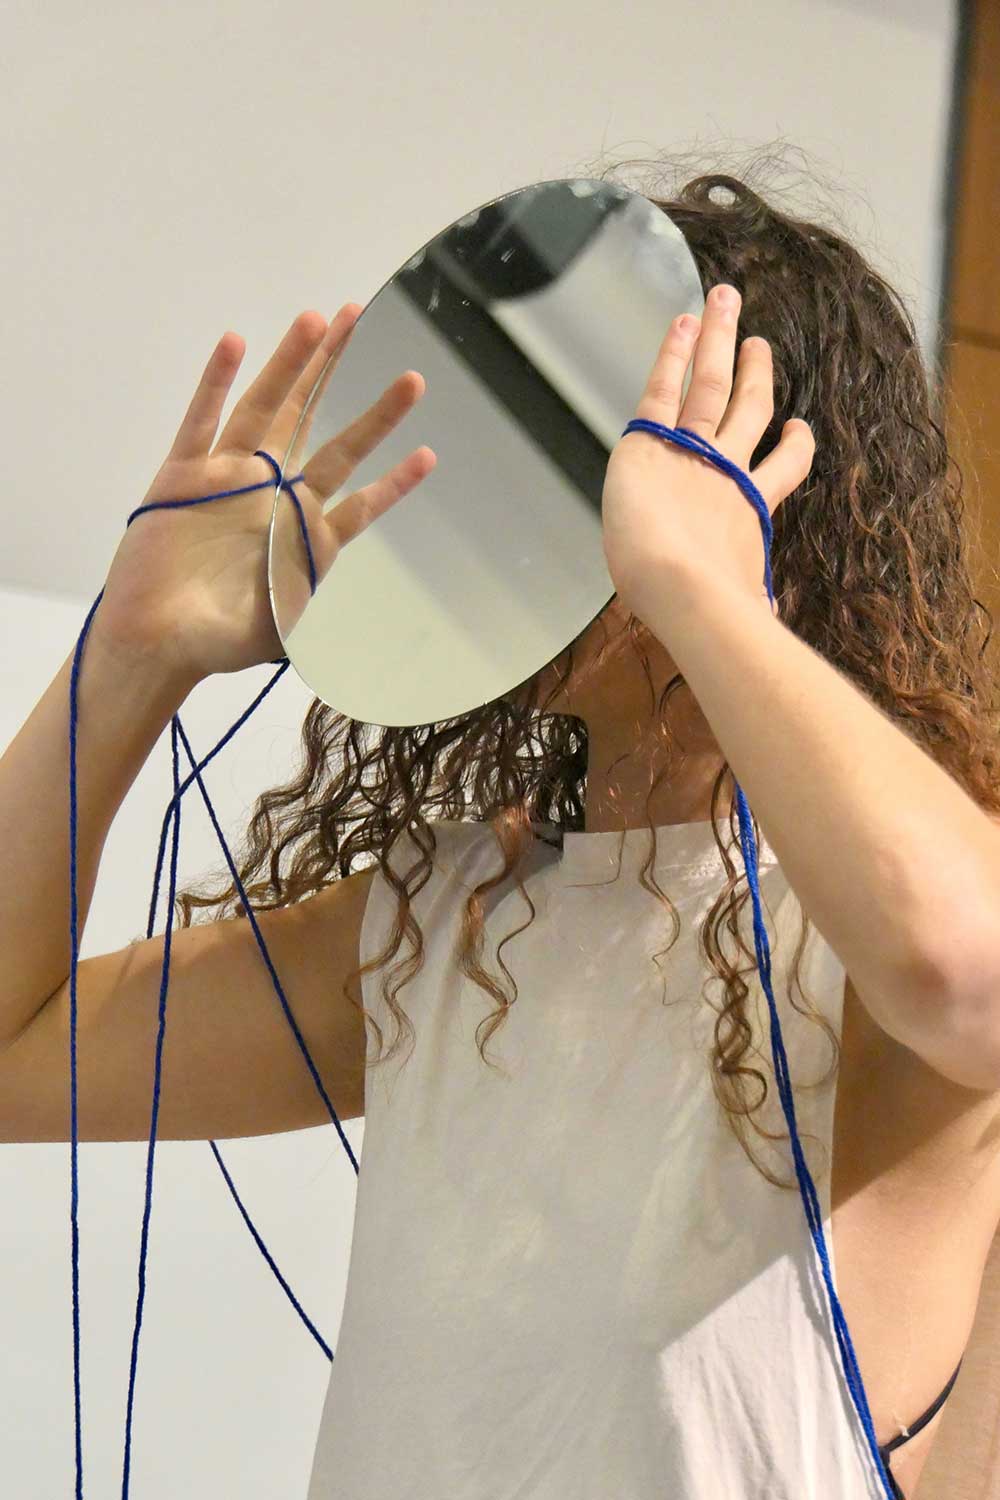 a student holds a round mirror in front of their face while gazing upward, arms dangling thin blue threads